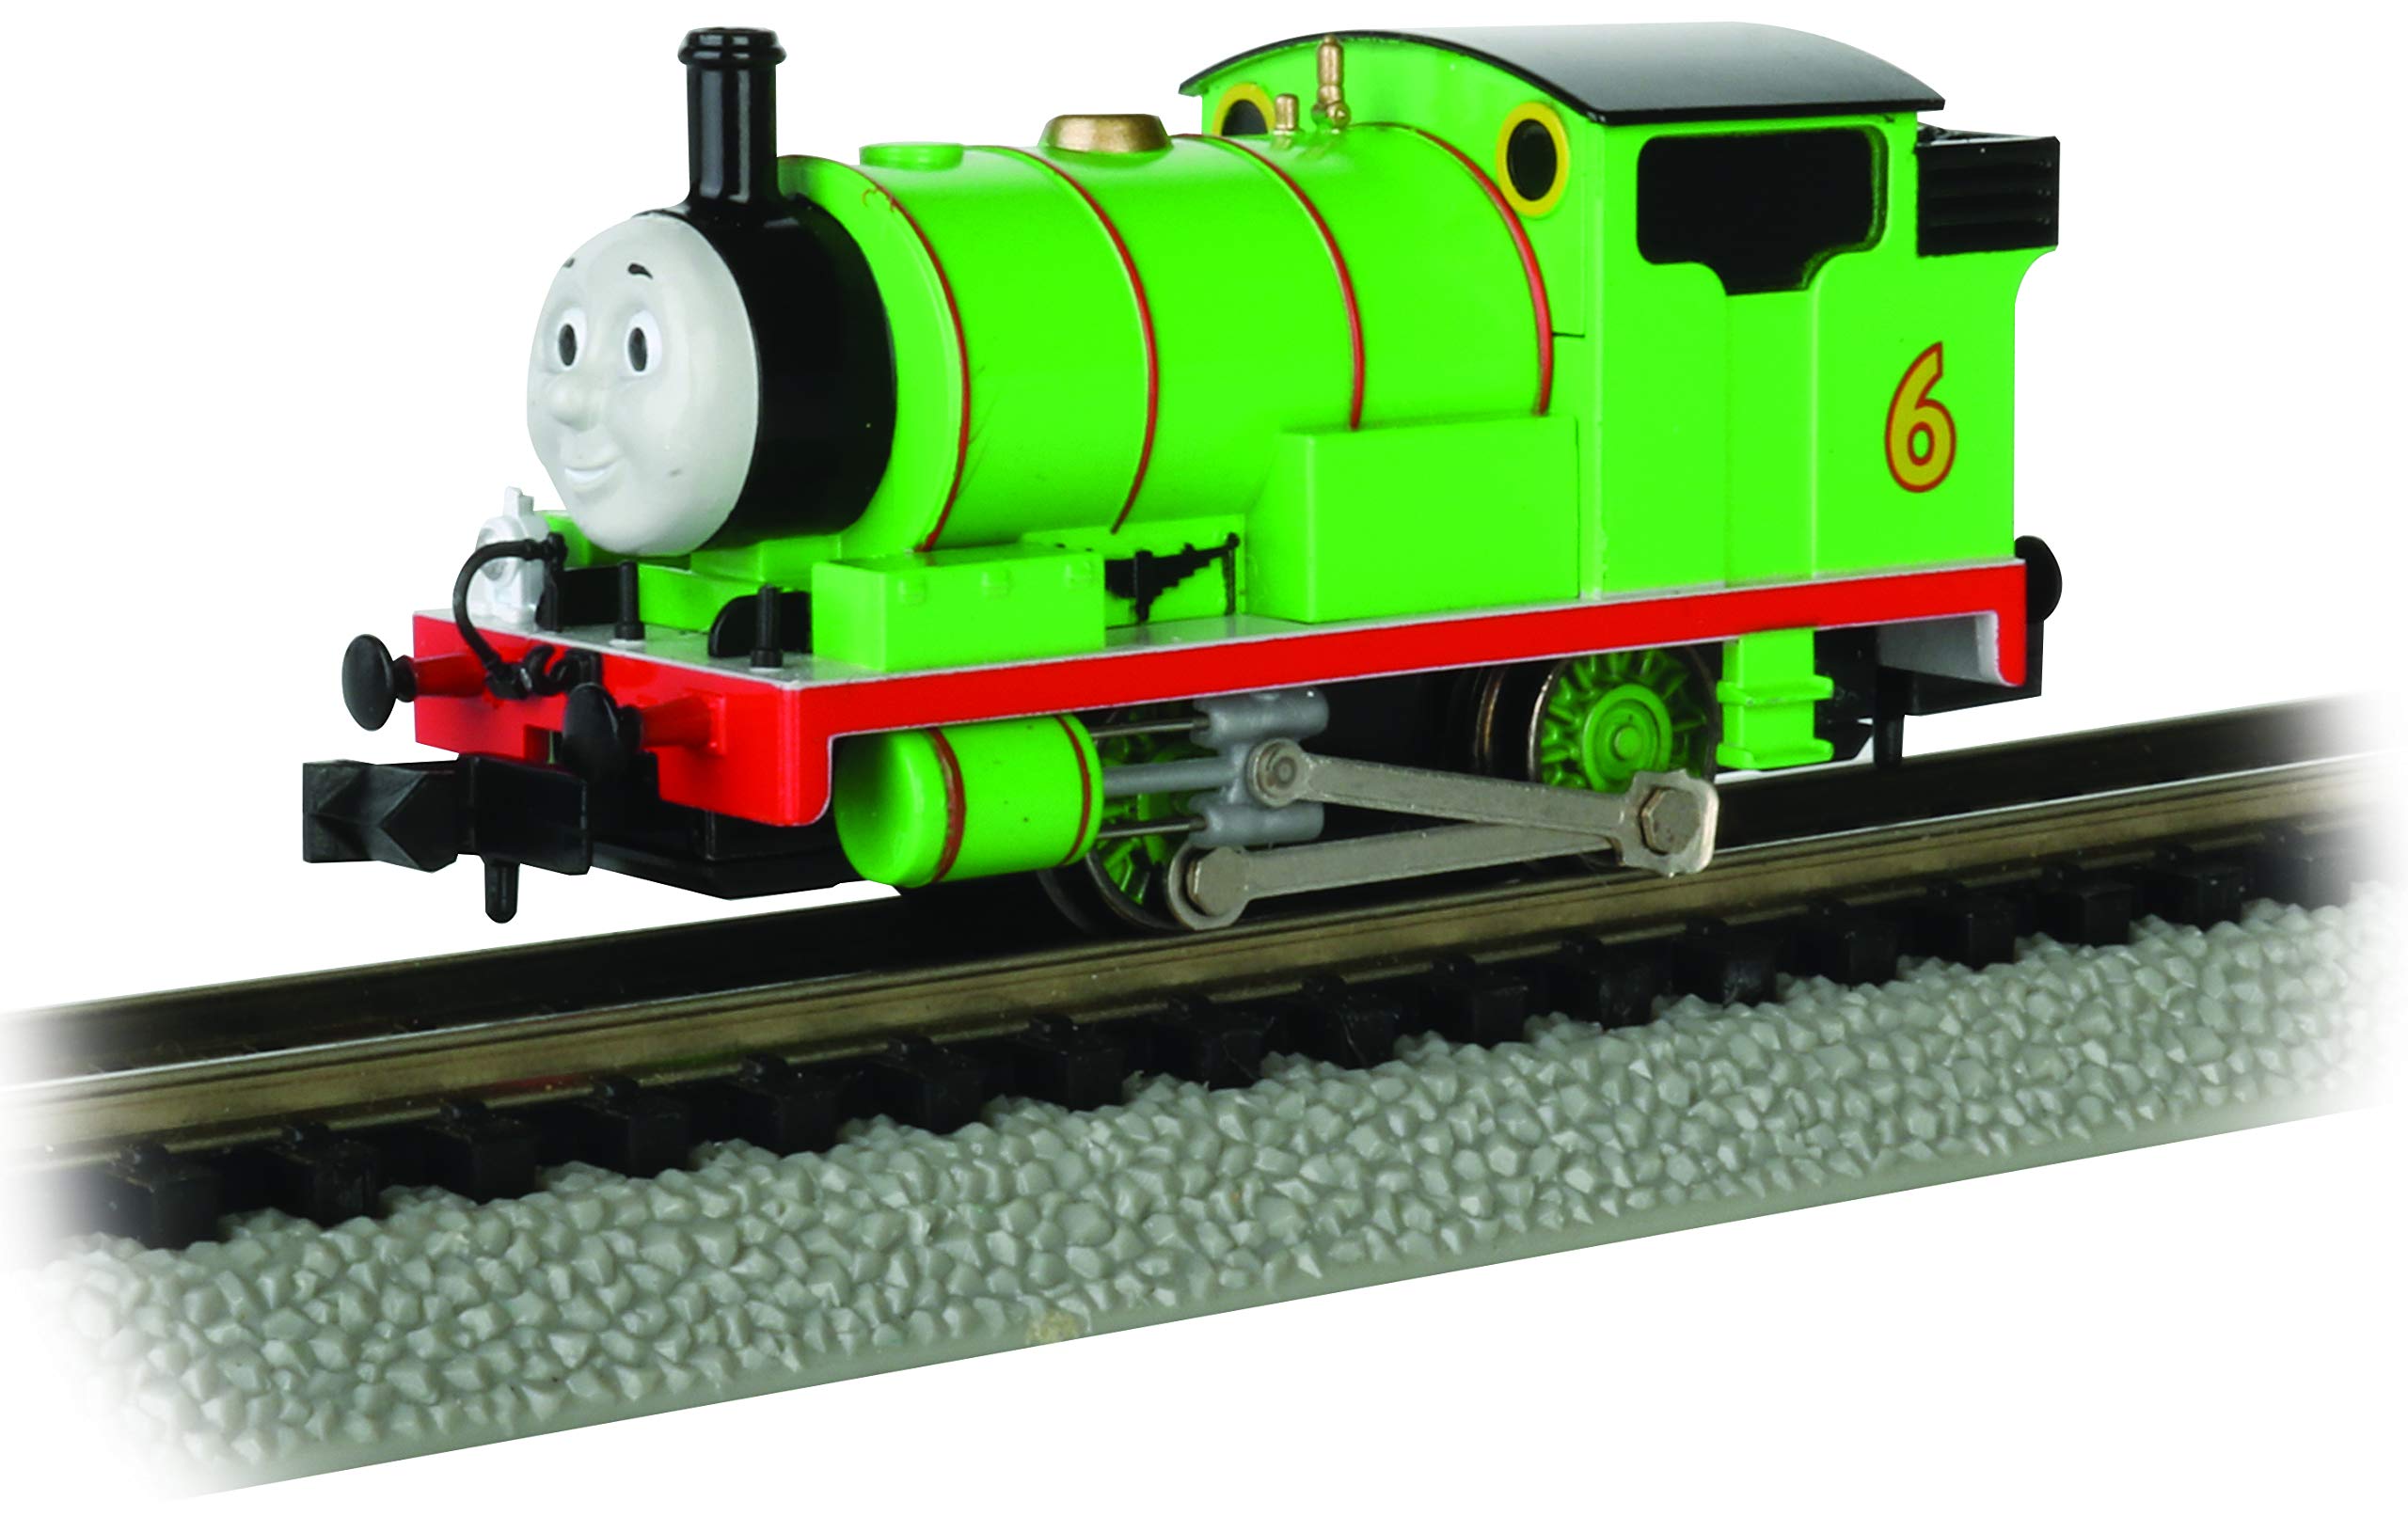 Bachmann Trains - Thomas & Friends™ Percy The Small Engine - N Scale